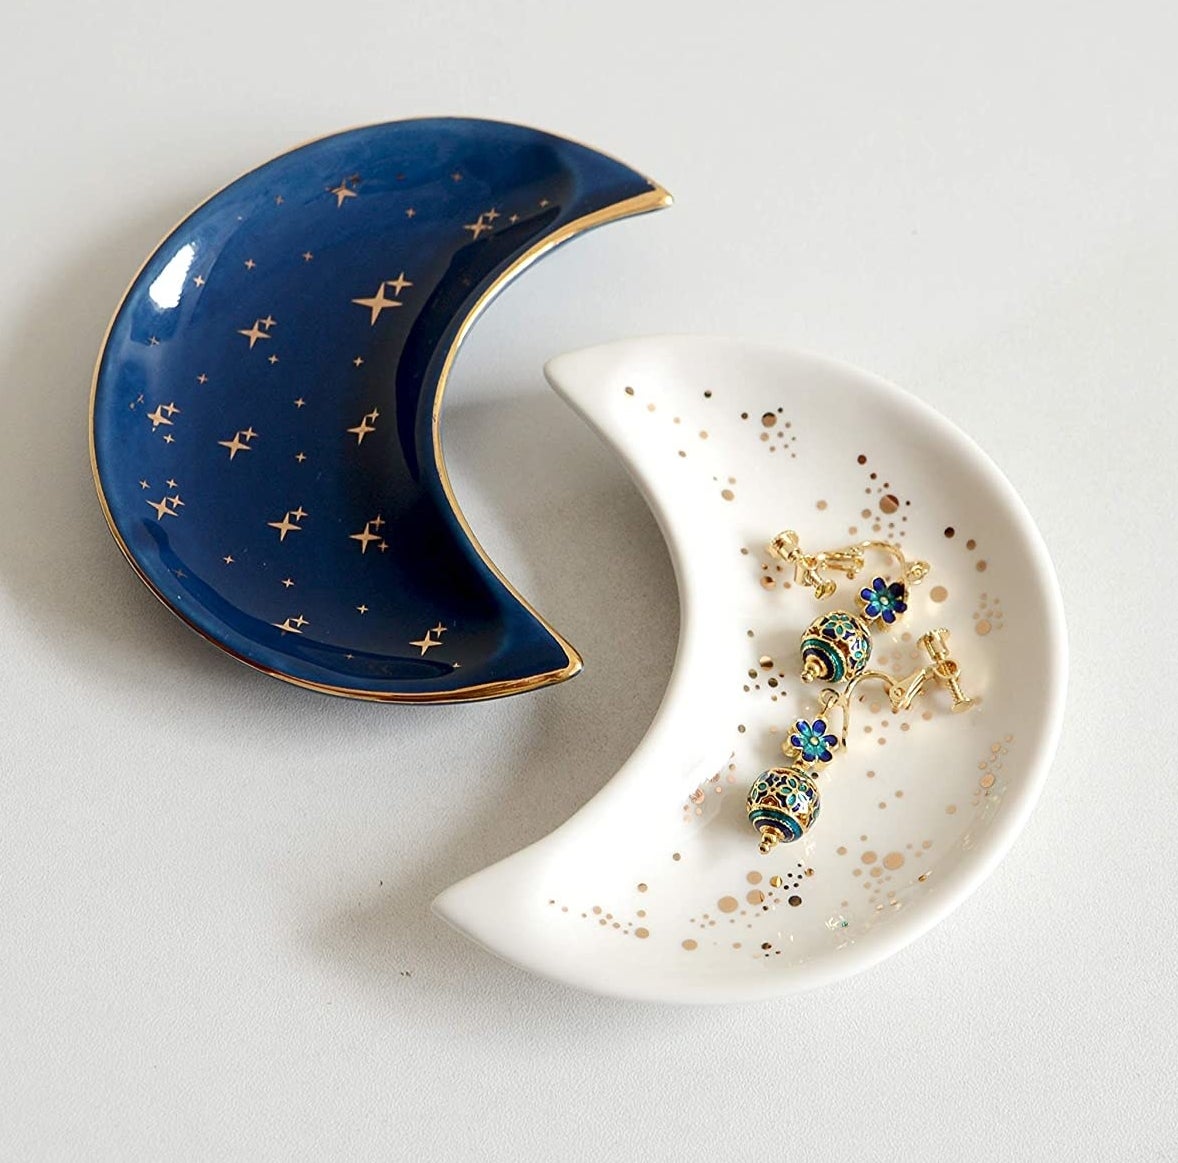 two moon-shaped trinket dishes